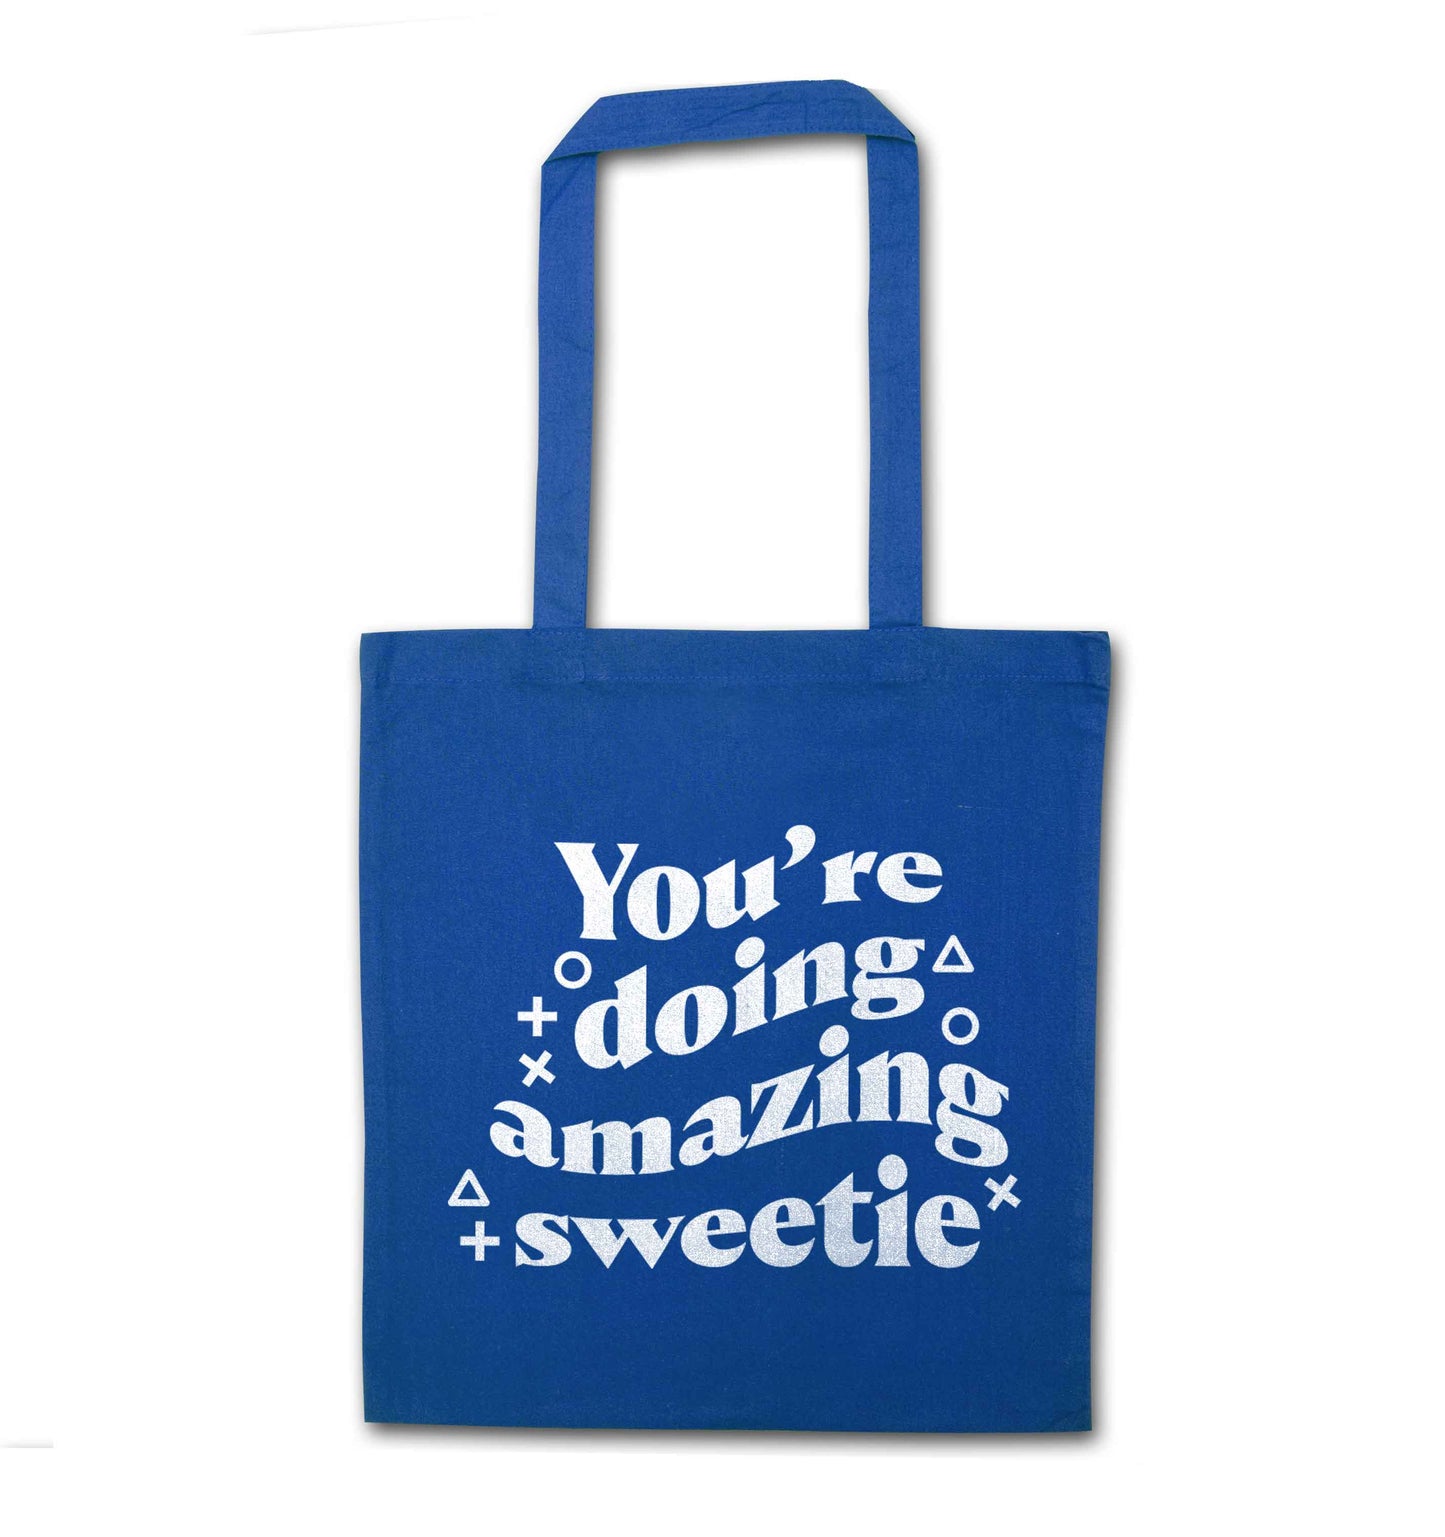 You're doing amazing sweetie blue tote bag